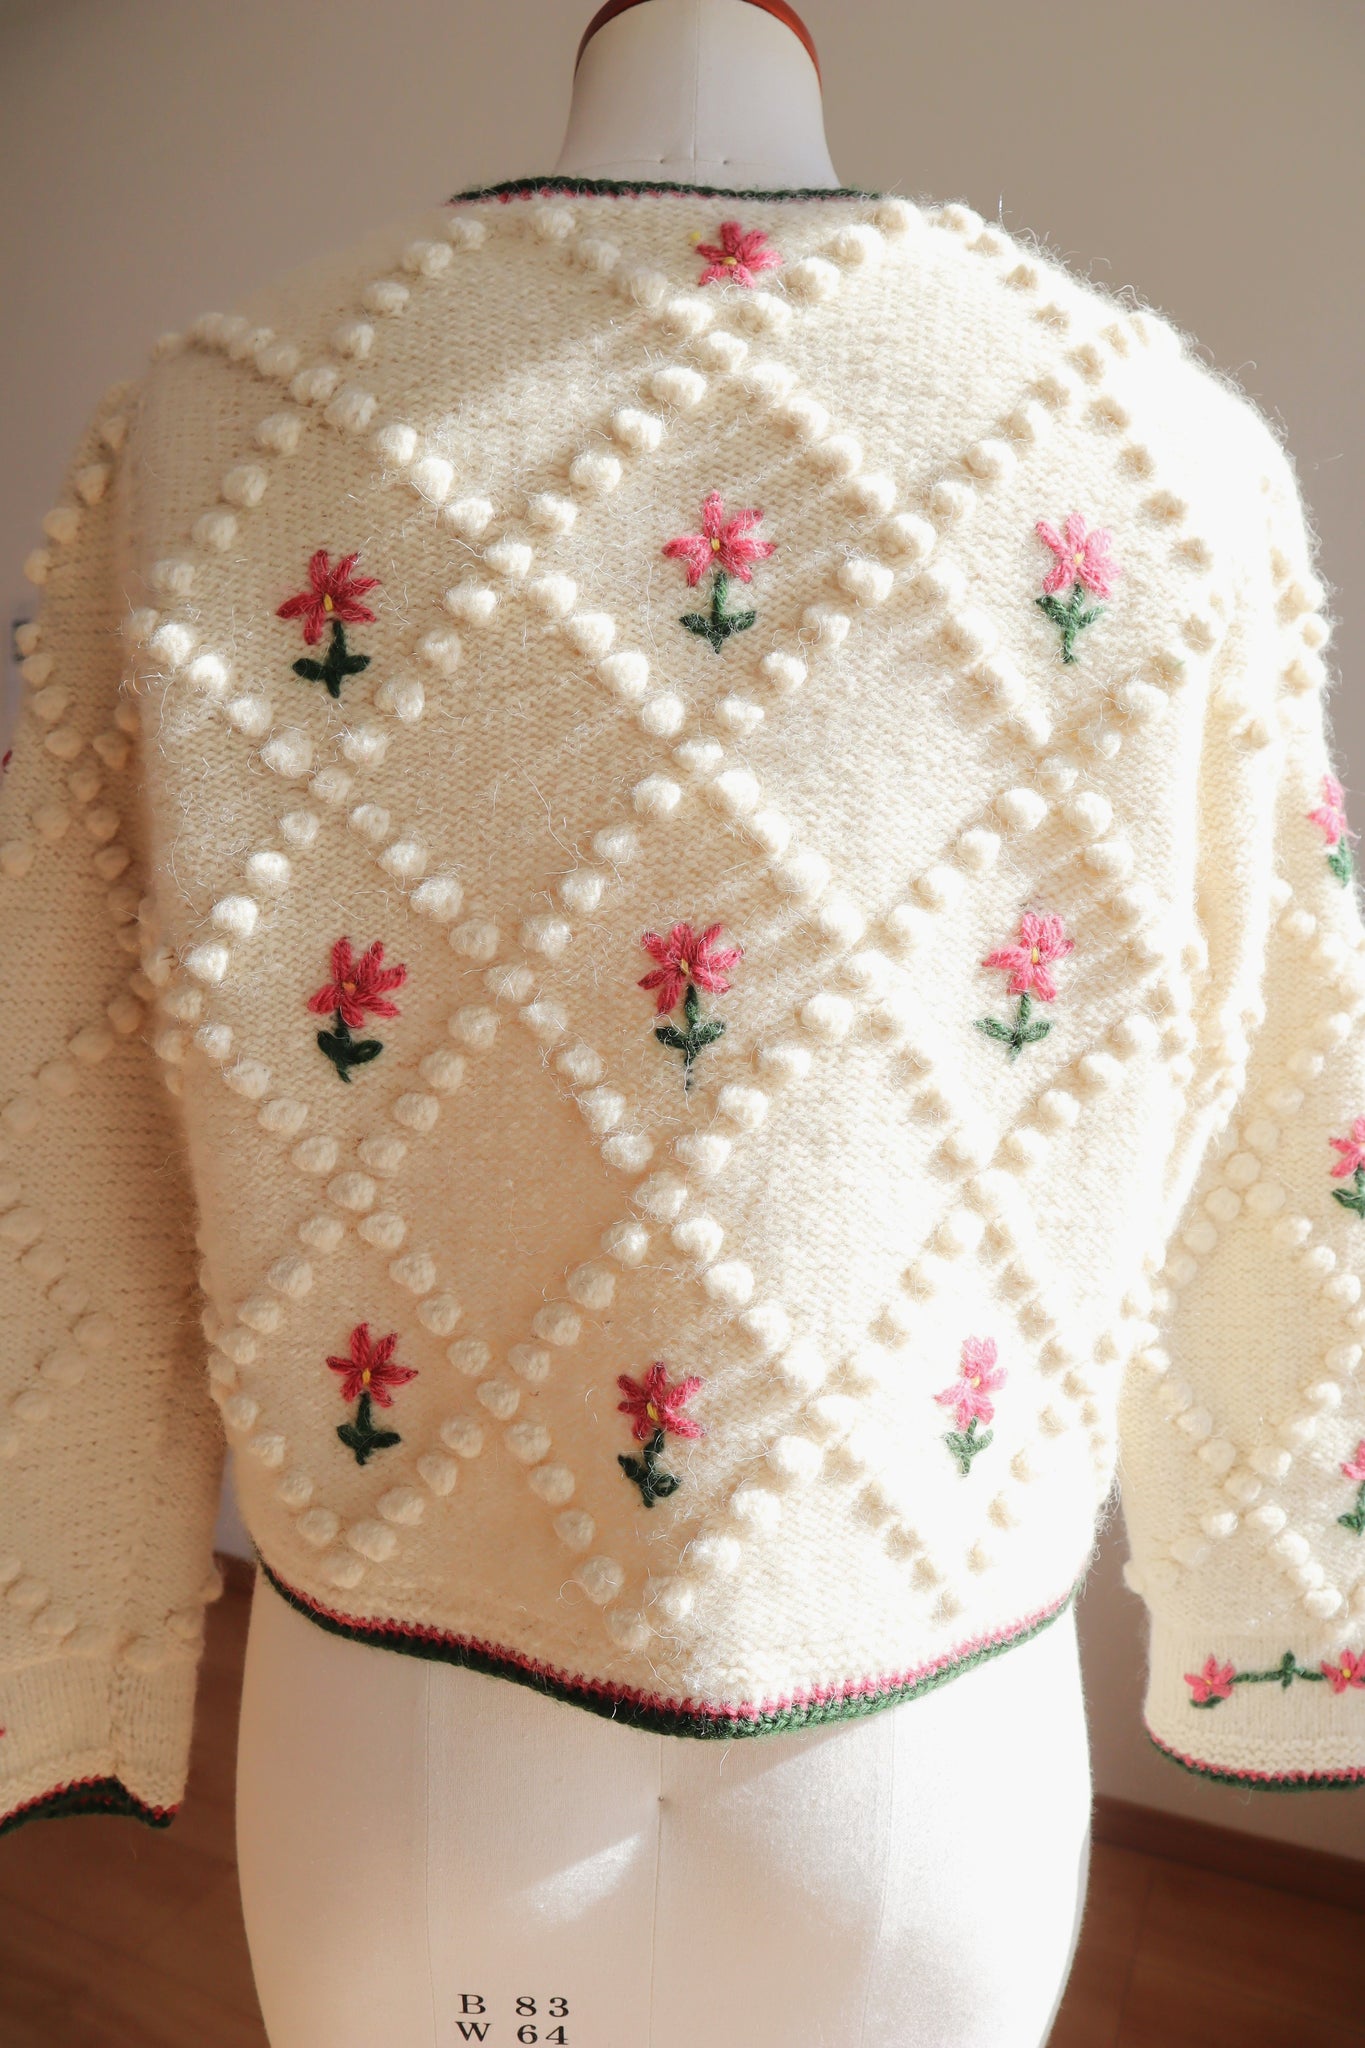 70s Hand Knit Pink Flower Embroidery Austrian Cardigan